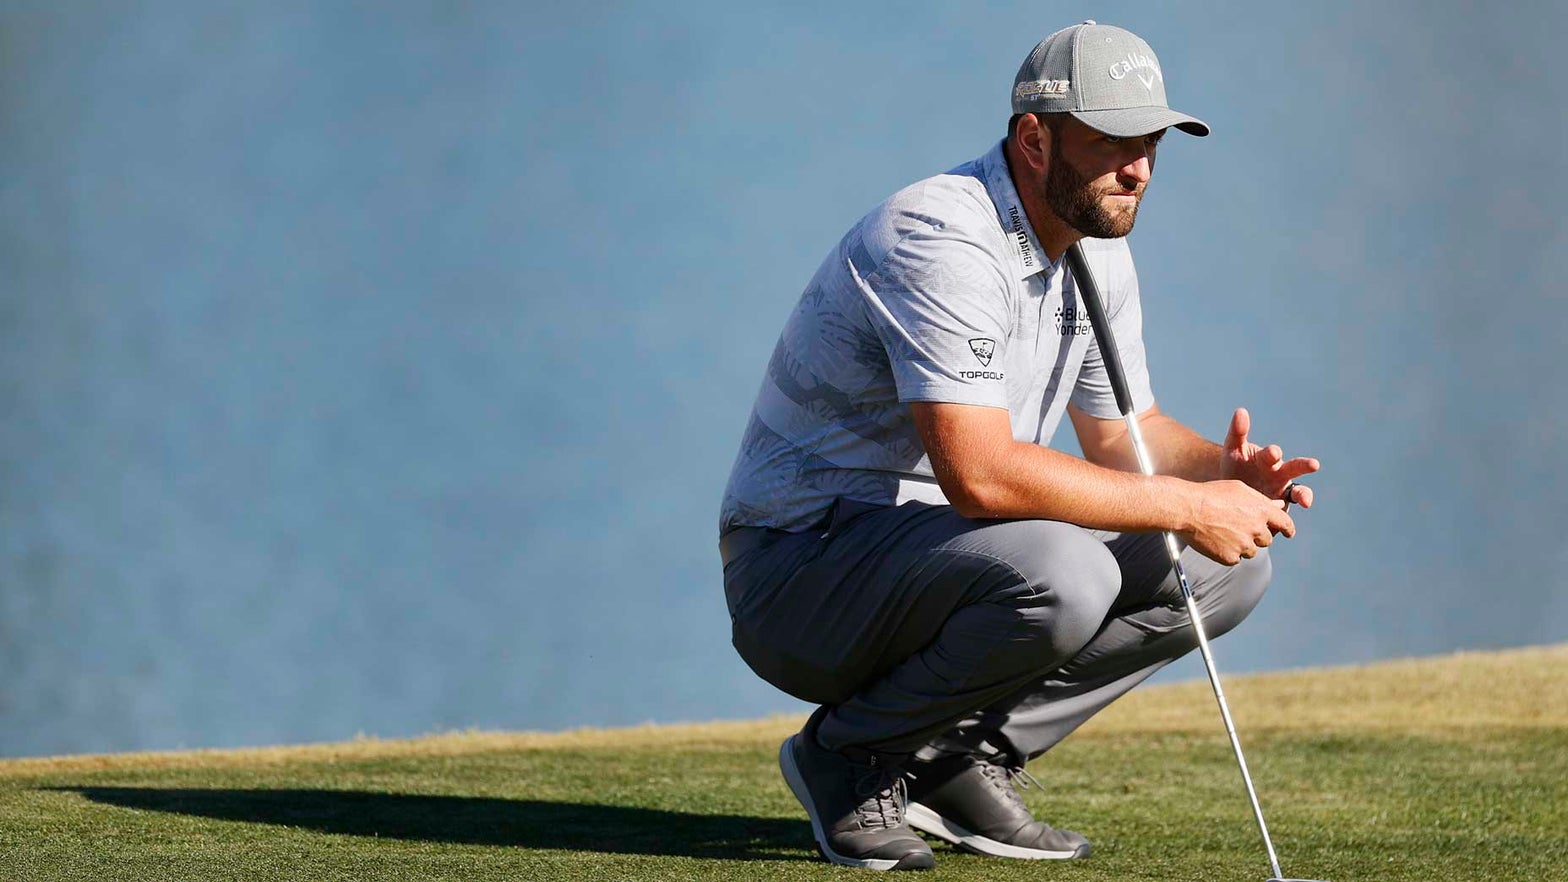 Here's what Jon Rahm really meant by his curse-filled rant